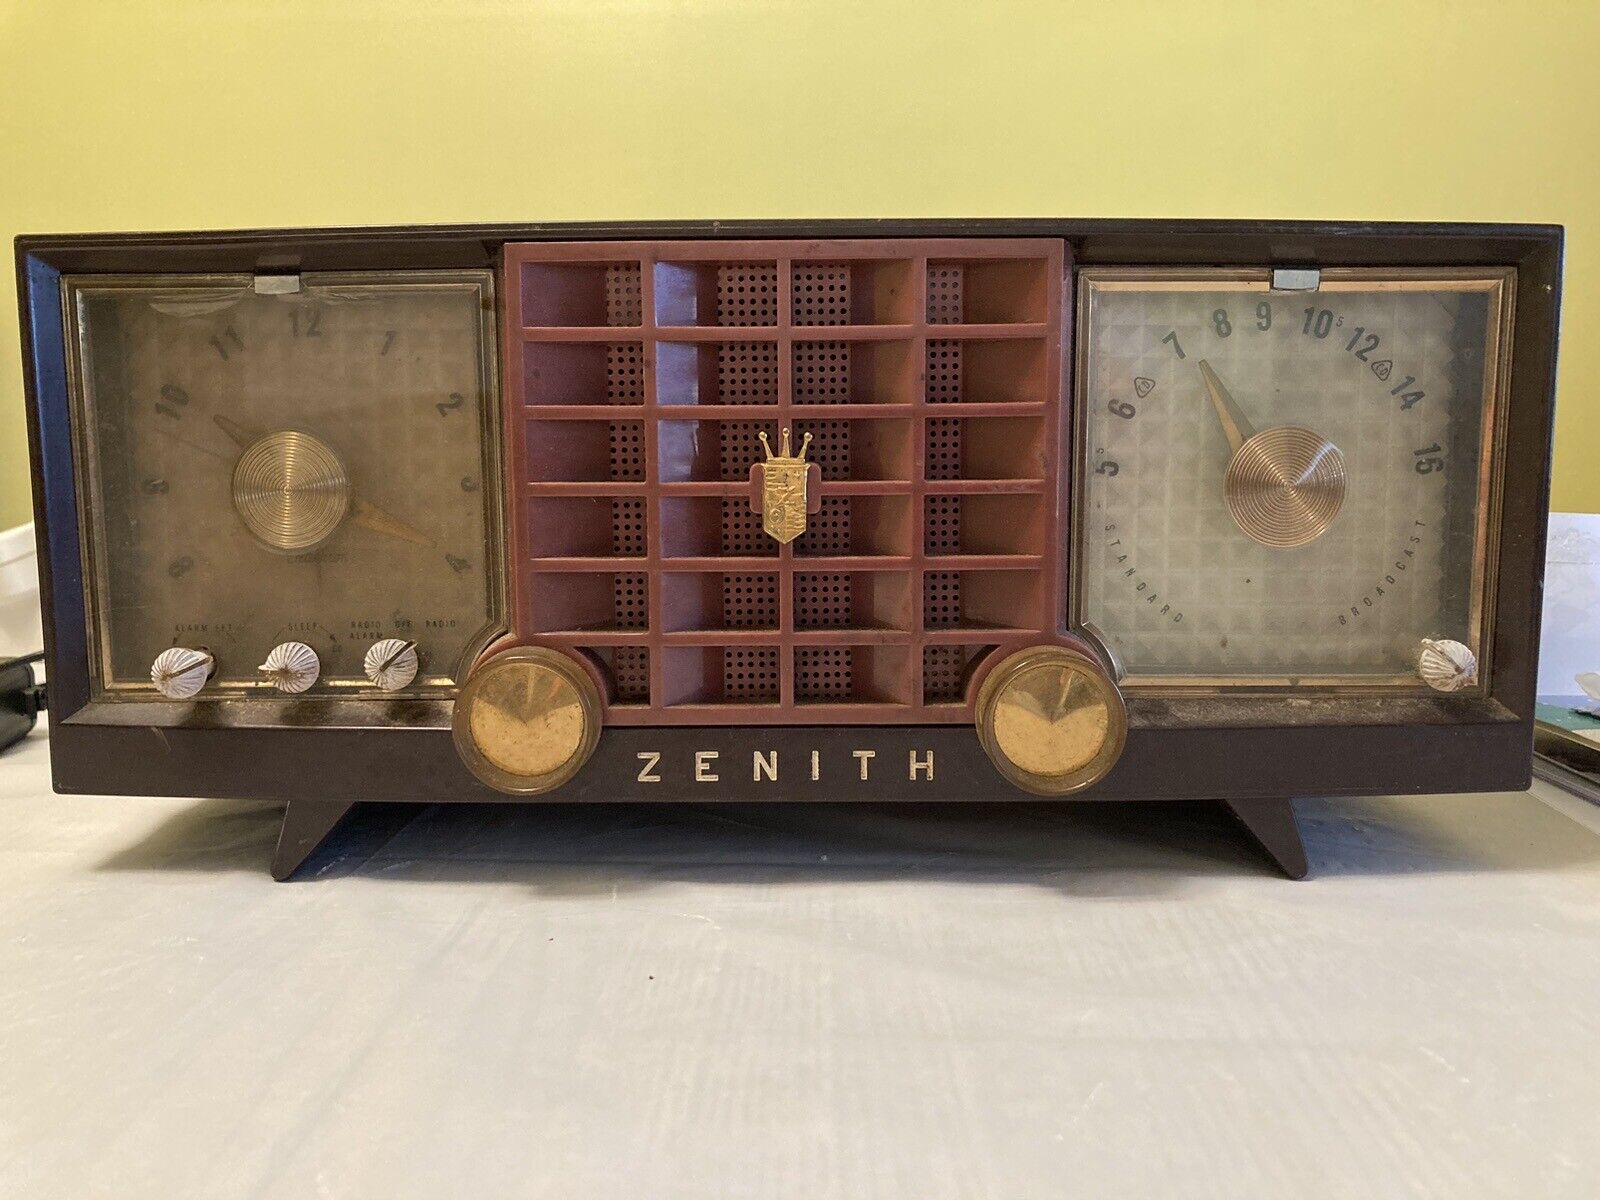 antique radio 1930-49 zenith, Works Perfectly, Excellent Condition.